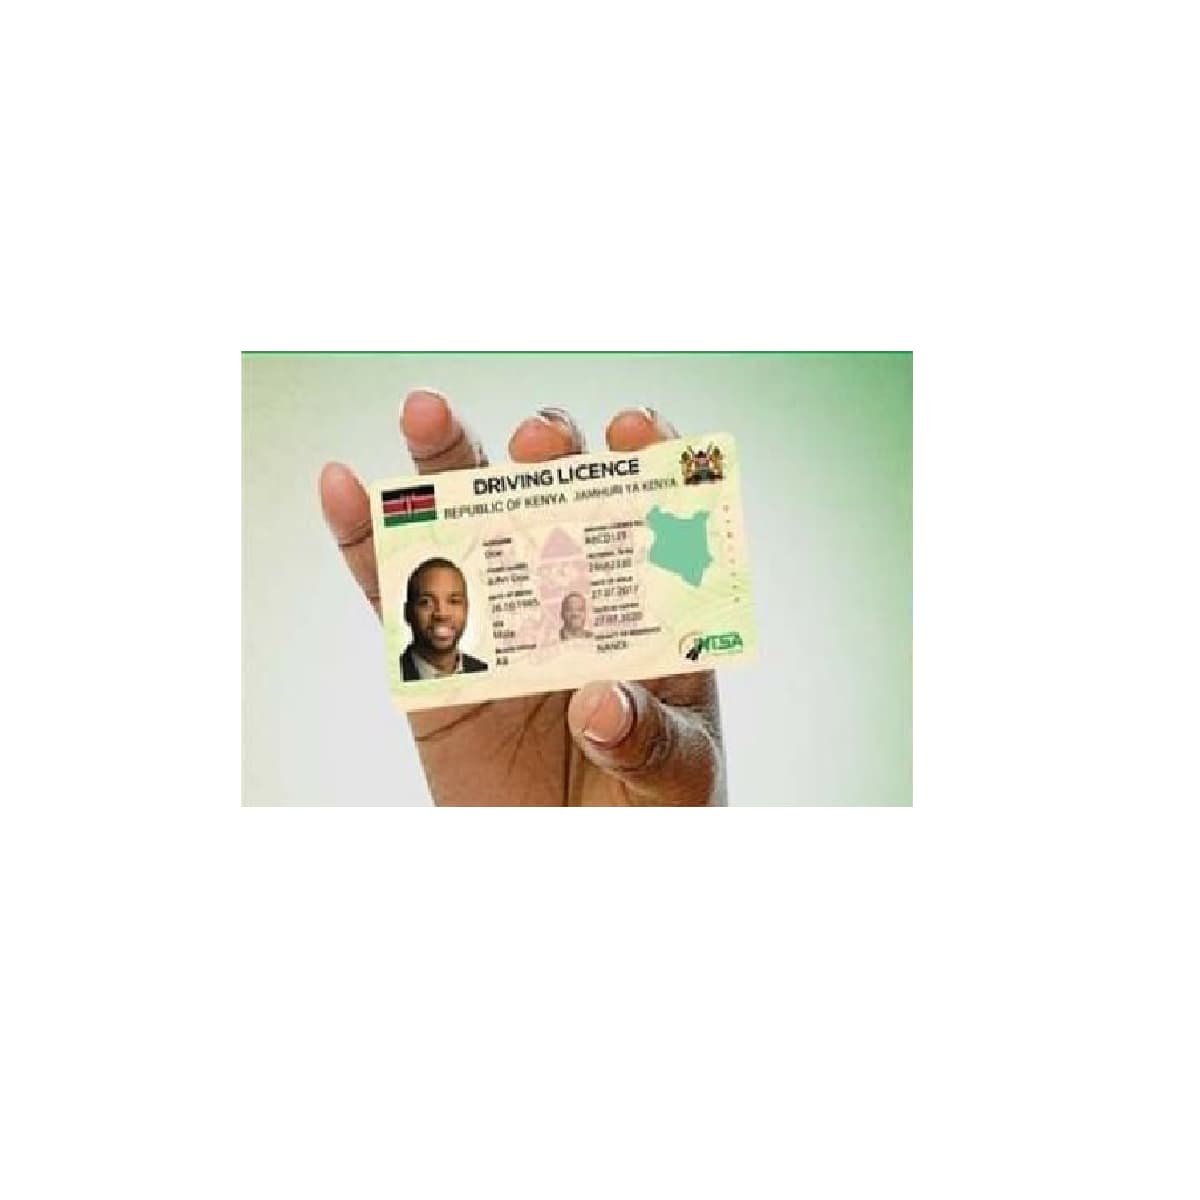 How Much is Driving License in Kenya?